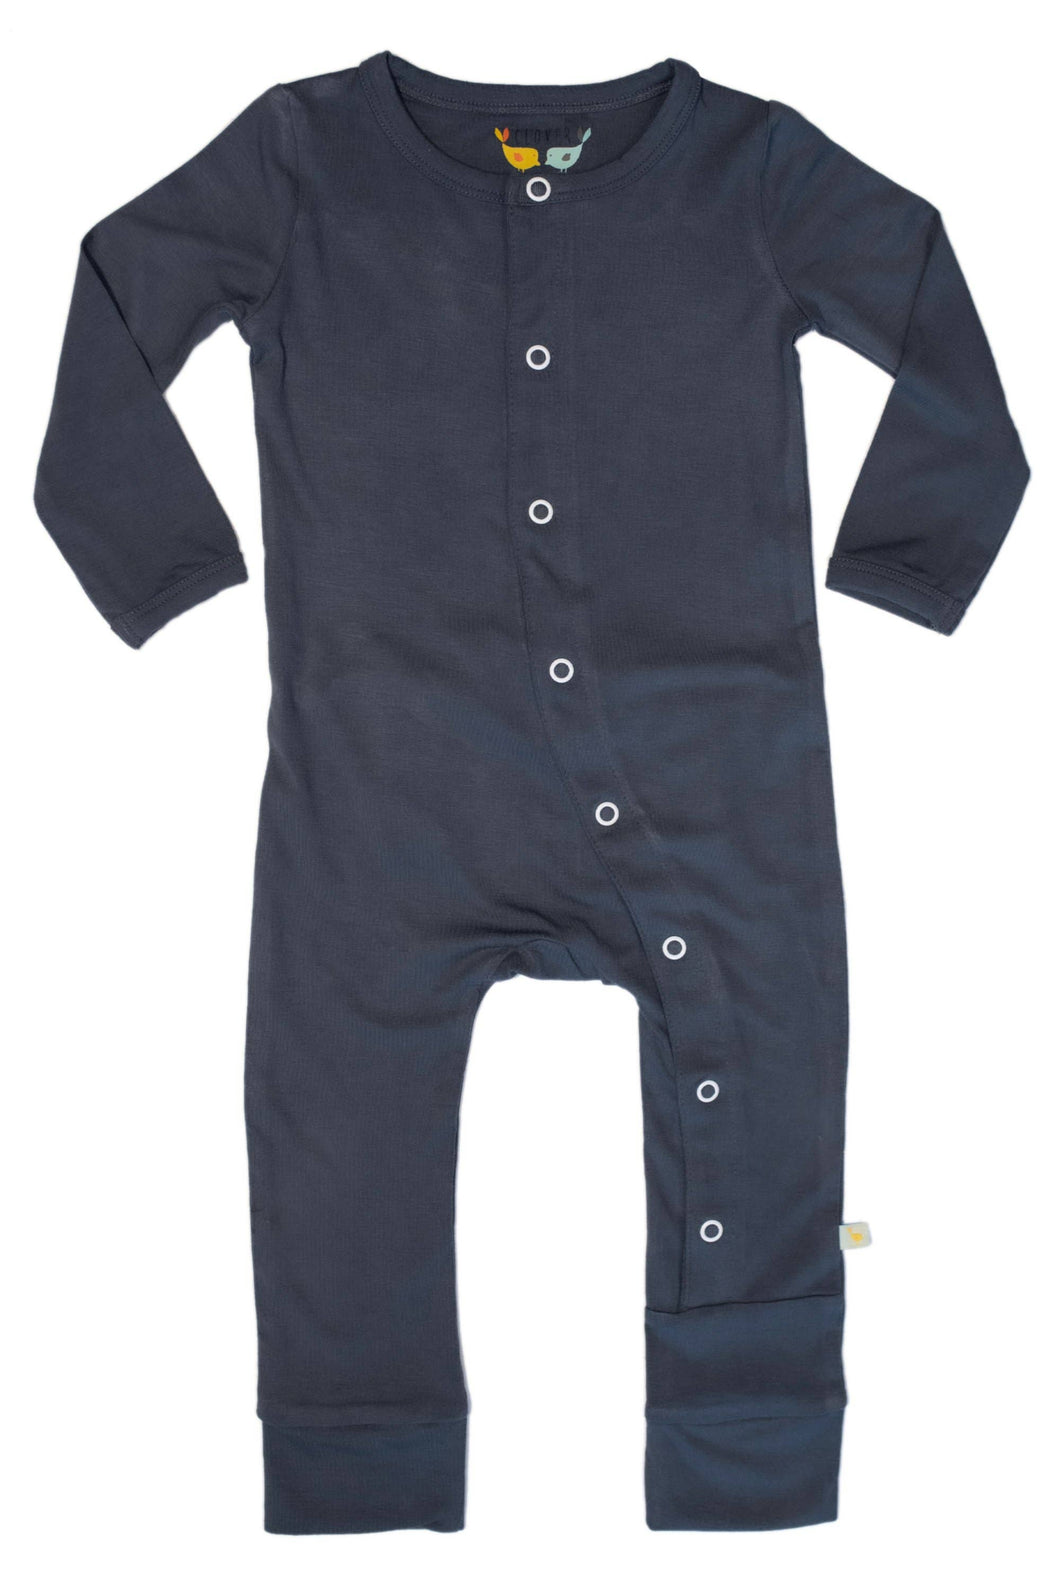 Solid Dark Slate Baby One Piece Coveralls